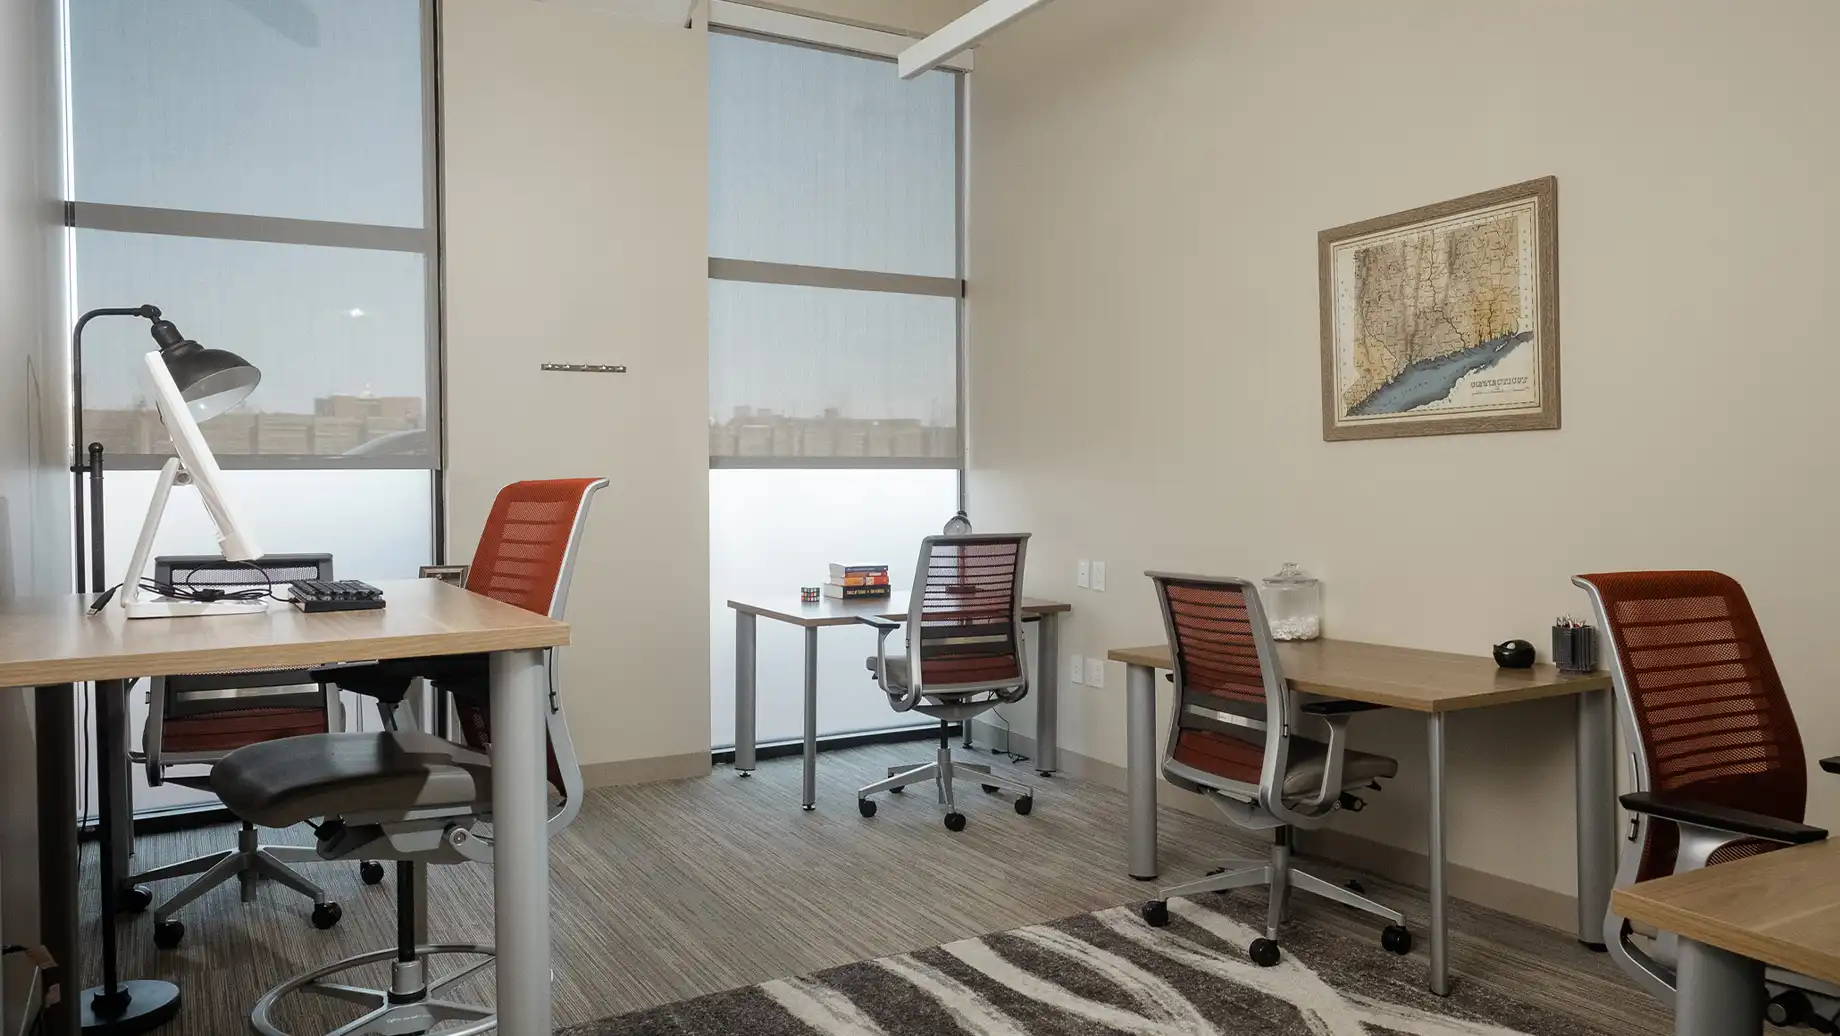 Private three person office with separate desks and outdoor views. Stamford Private Office & Coworking Space Serendipity Labs